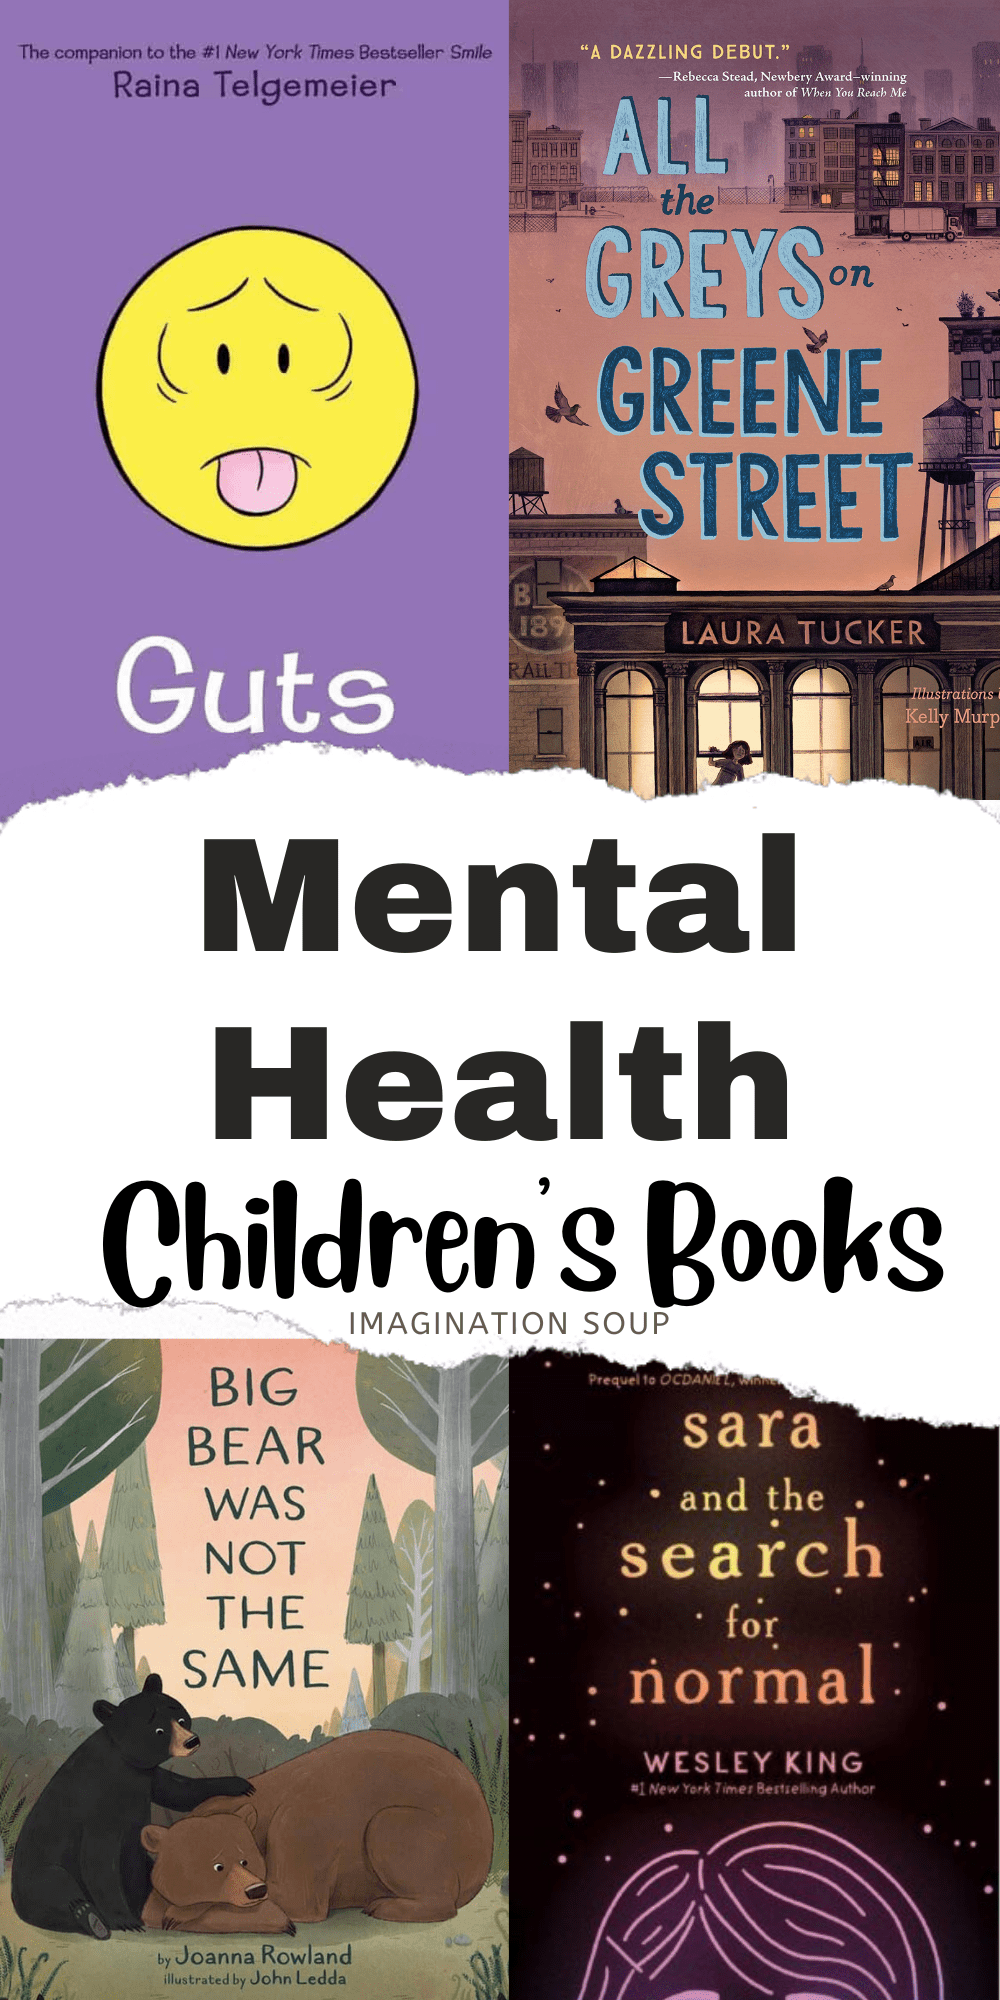 Children's books about mental illness and mental health